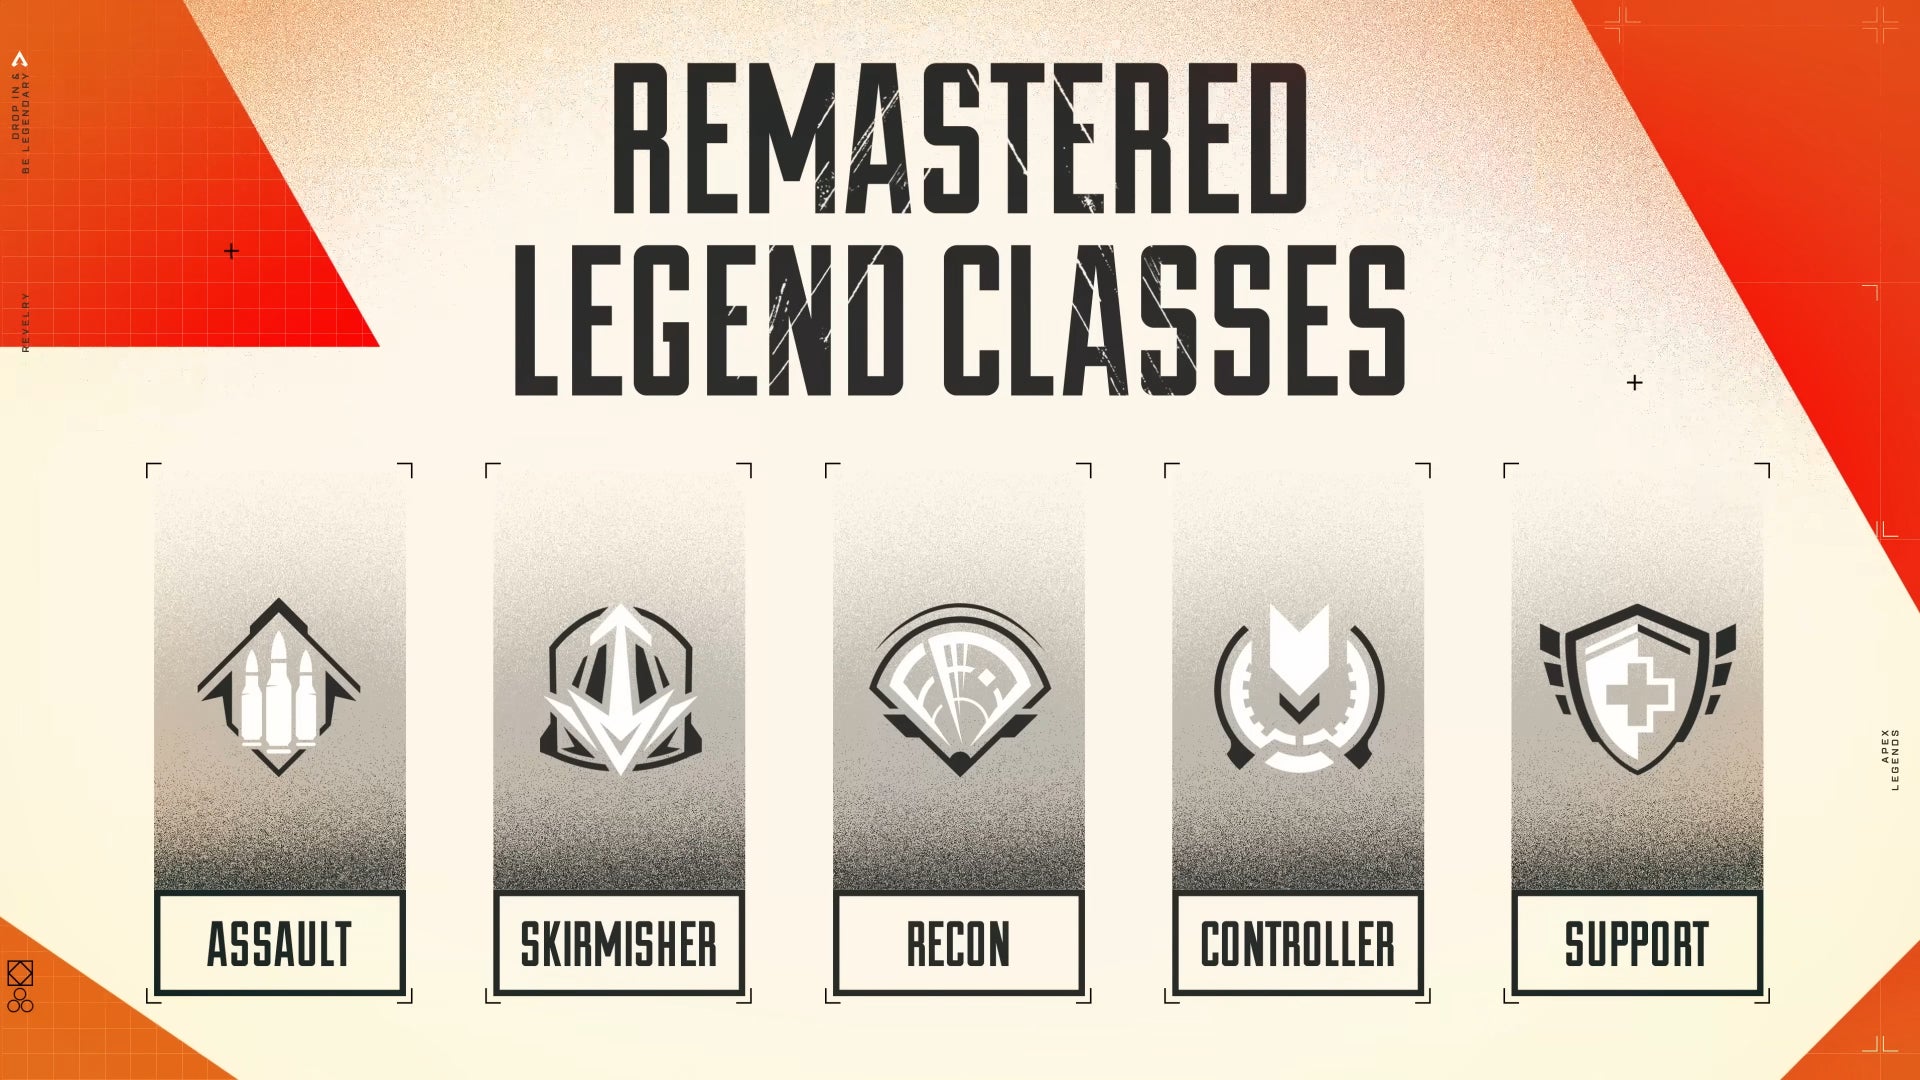 An infographic of the new Legend classes in Apex Legends. From left to right: Assault, Skirmisher, Recon, Controller, and Support.